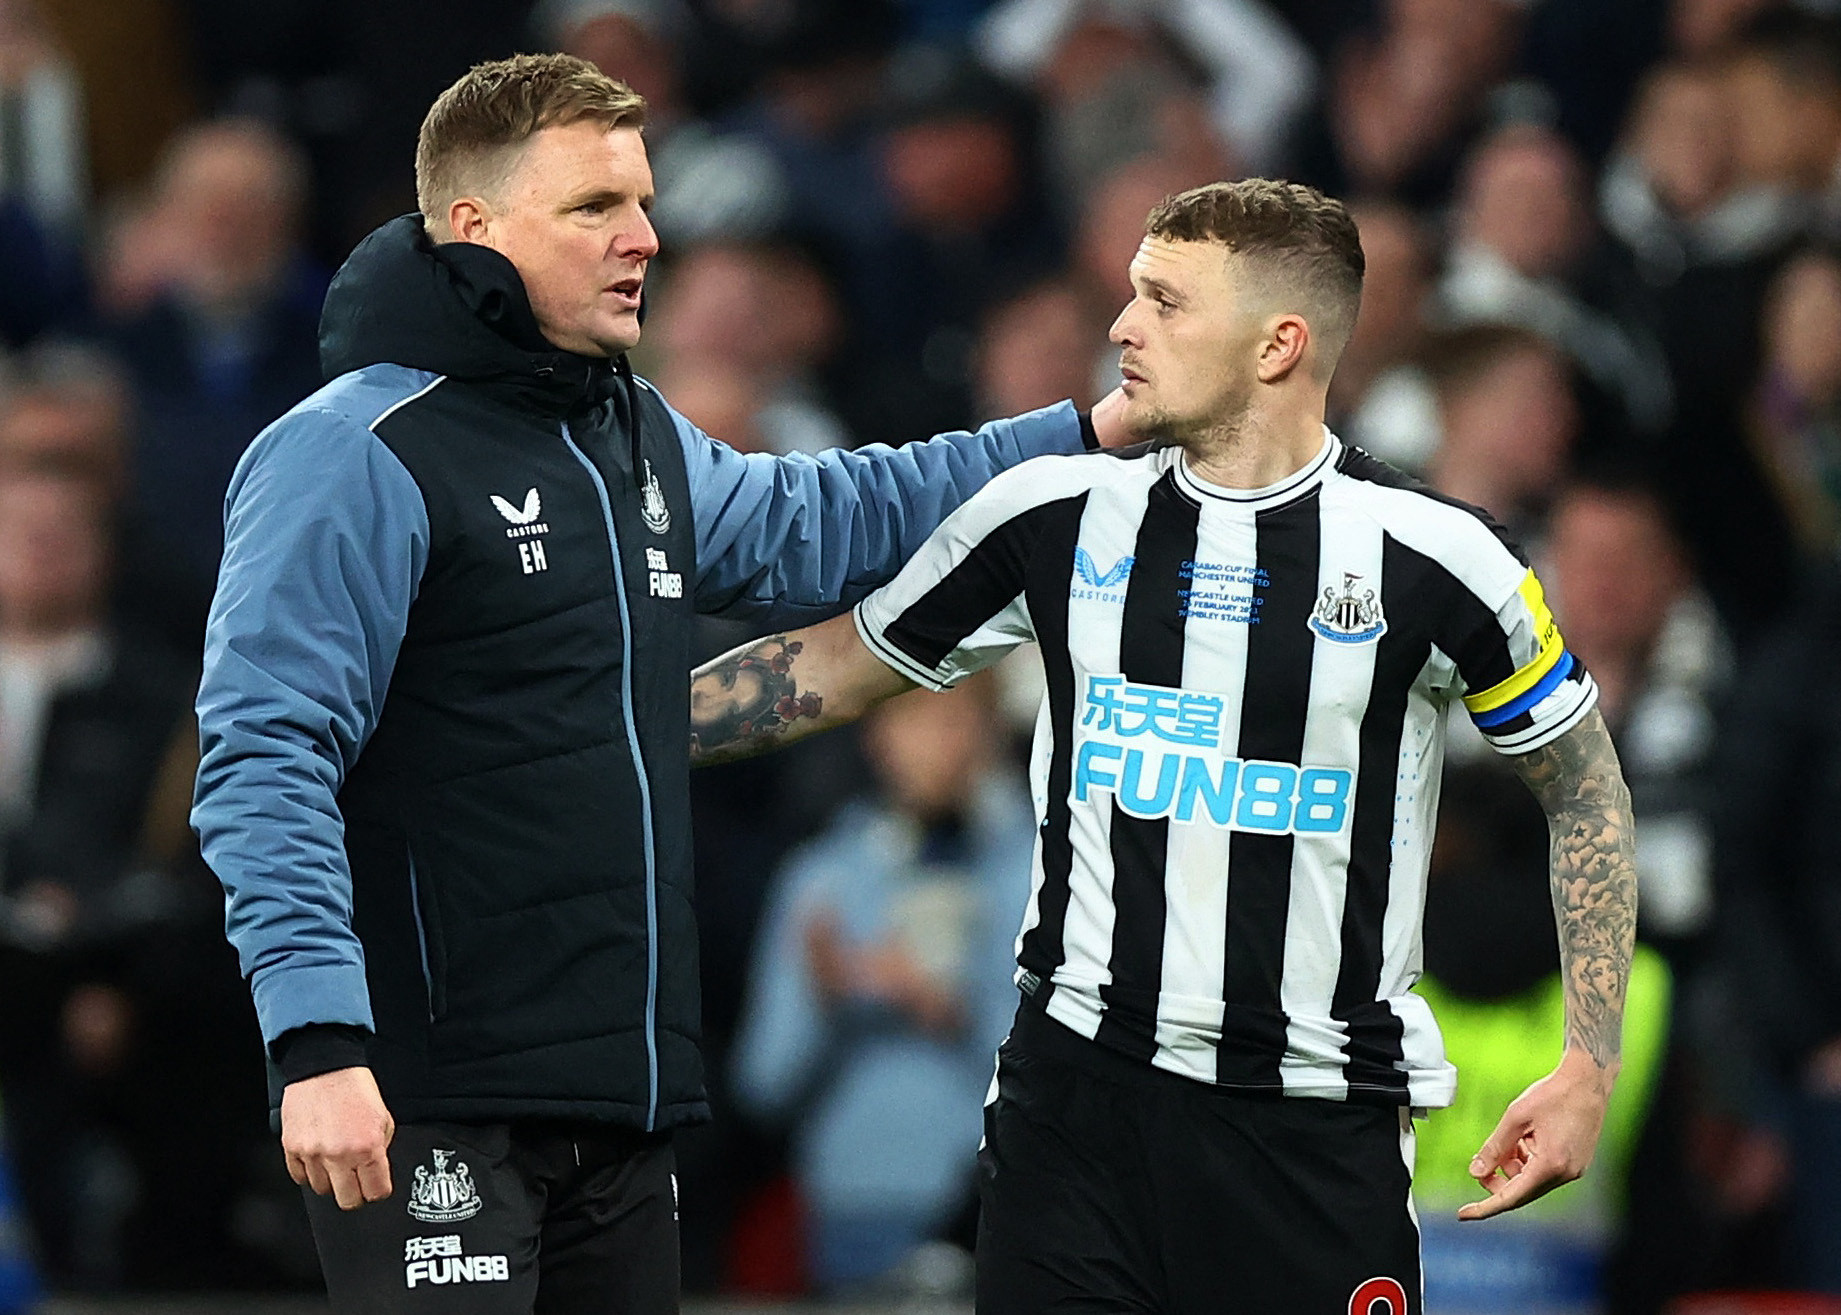 Newcastle owners vow to build on League Cup final run